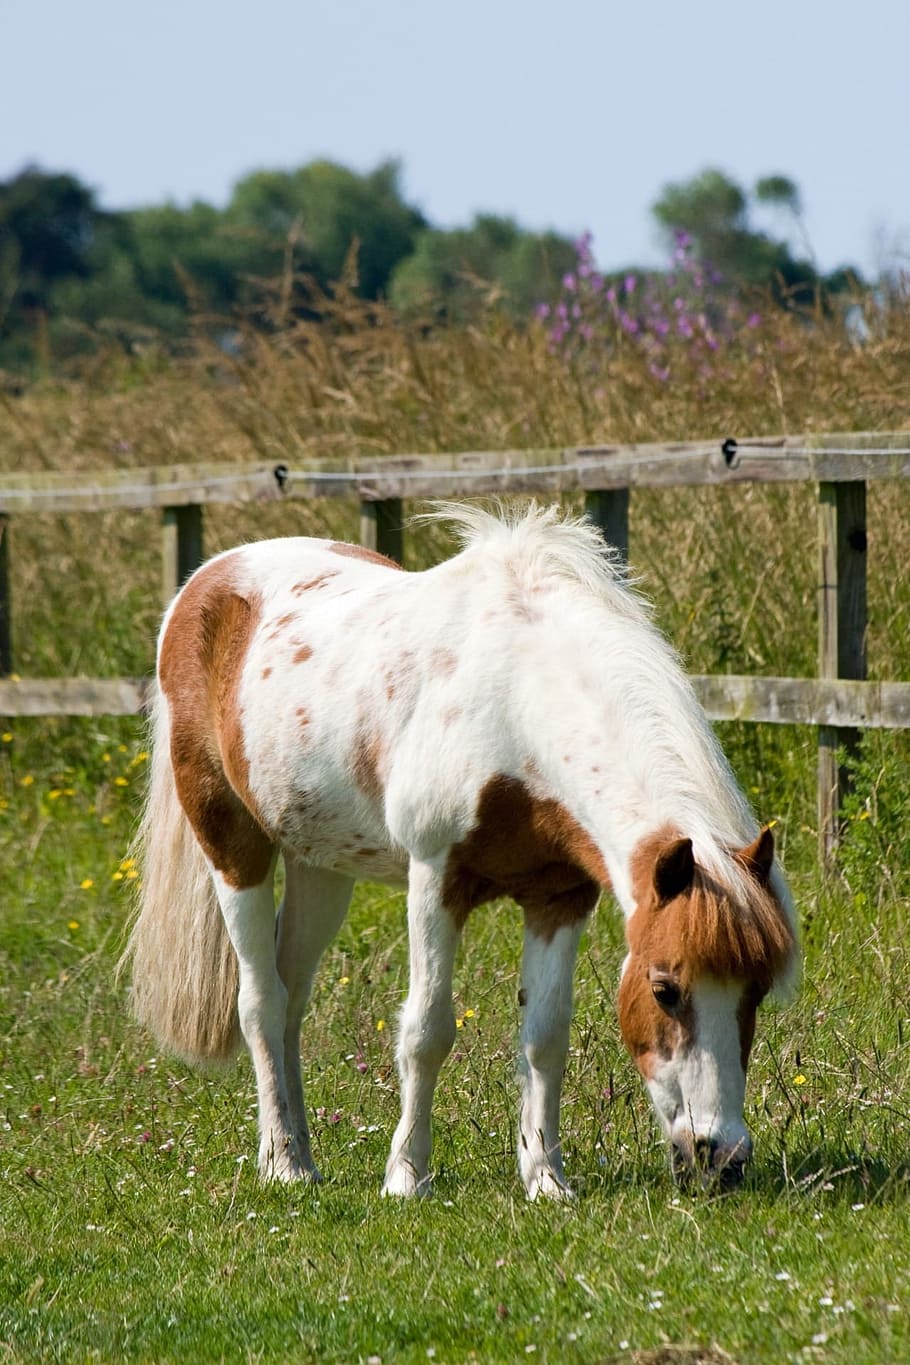 photo of brown and white horse on green grass during daytime